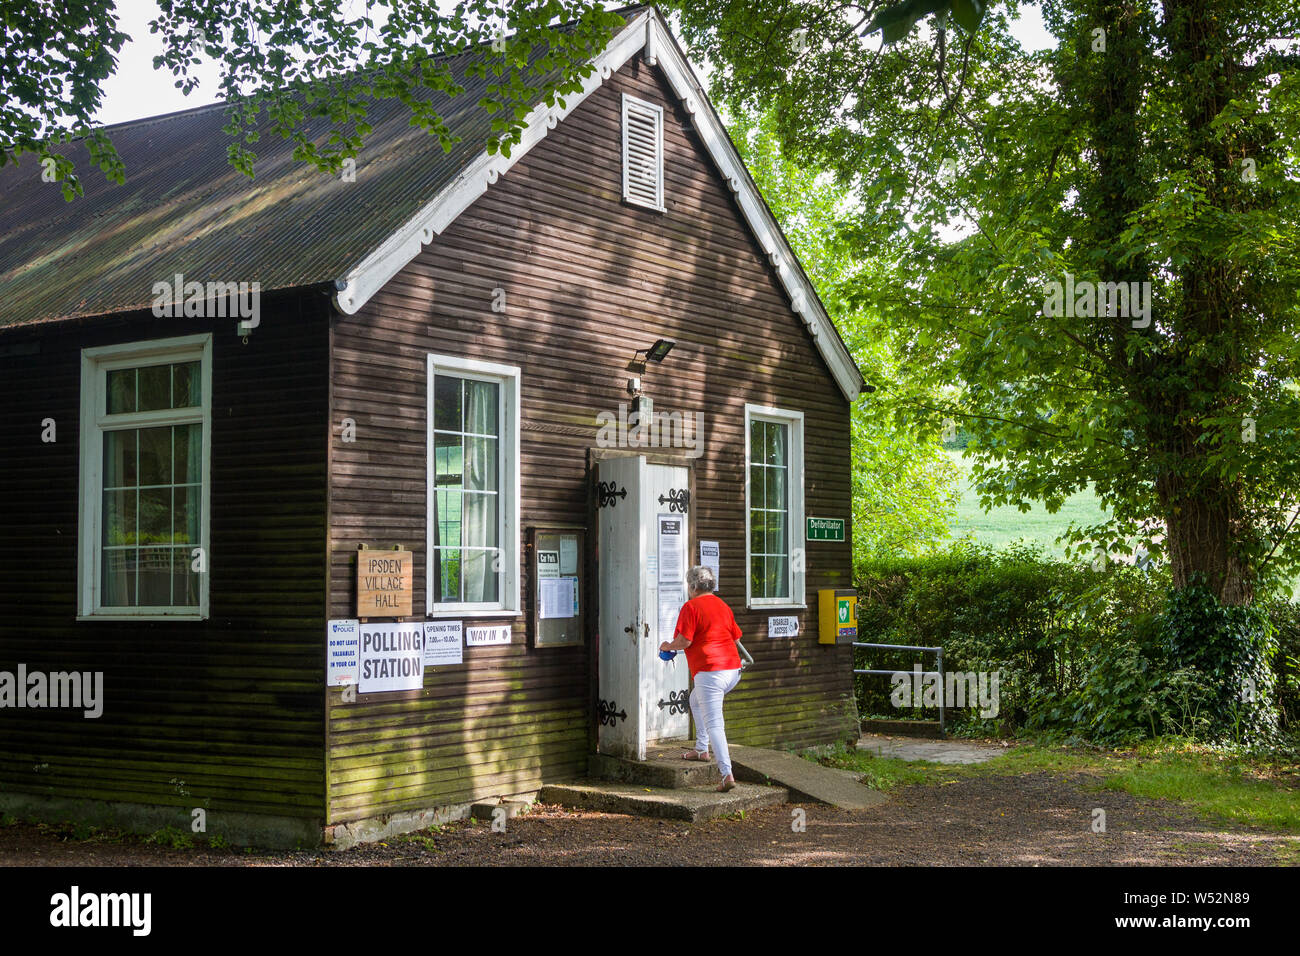 A woman in a bright red top goes to vote in the Polling Station in the village hall in Ipsden, Oxfordshire Stock Photo